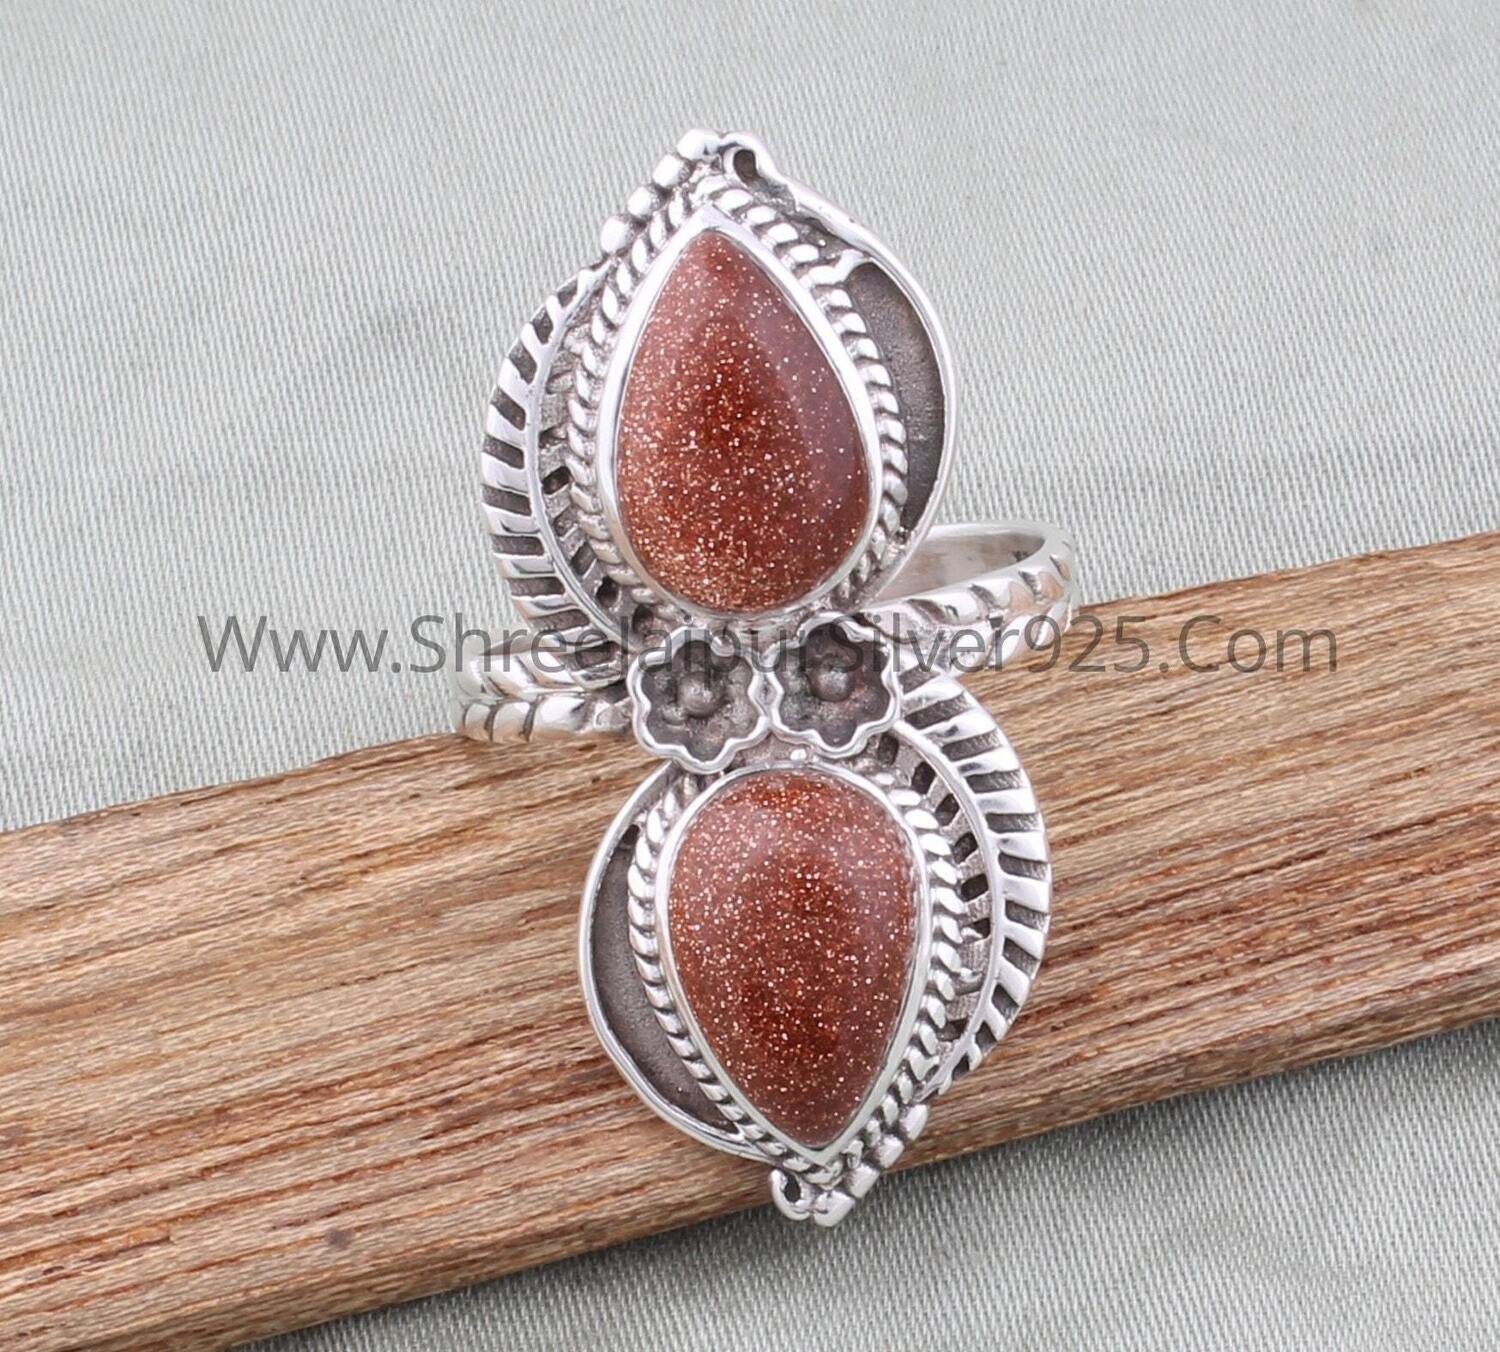 Carved Band Silver Ring 925 Sterling Silver Sunstone Two Pear Gemstone Ring, Designer Leaves Gemstone Silver Ring Silver Women Jewelry Gift